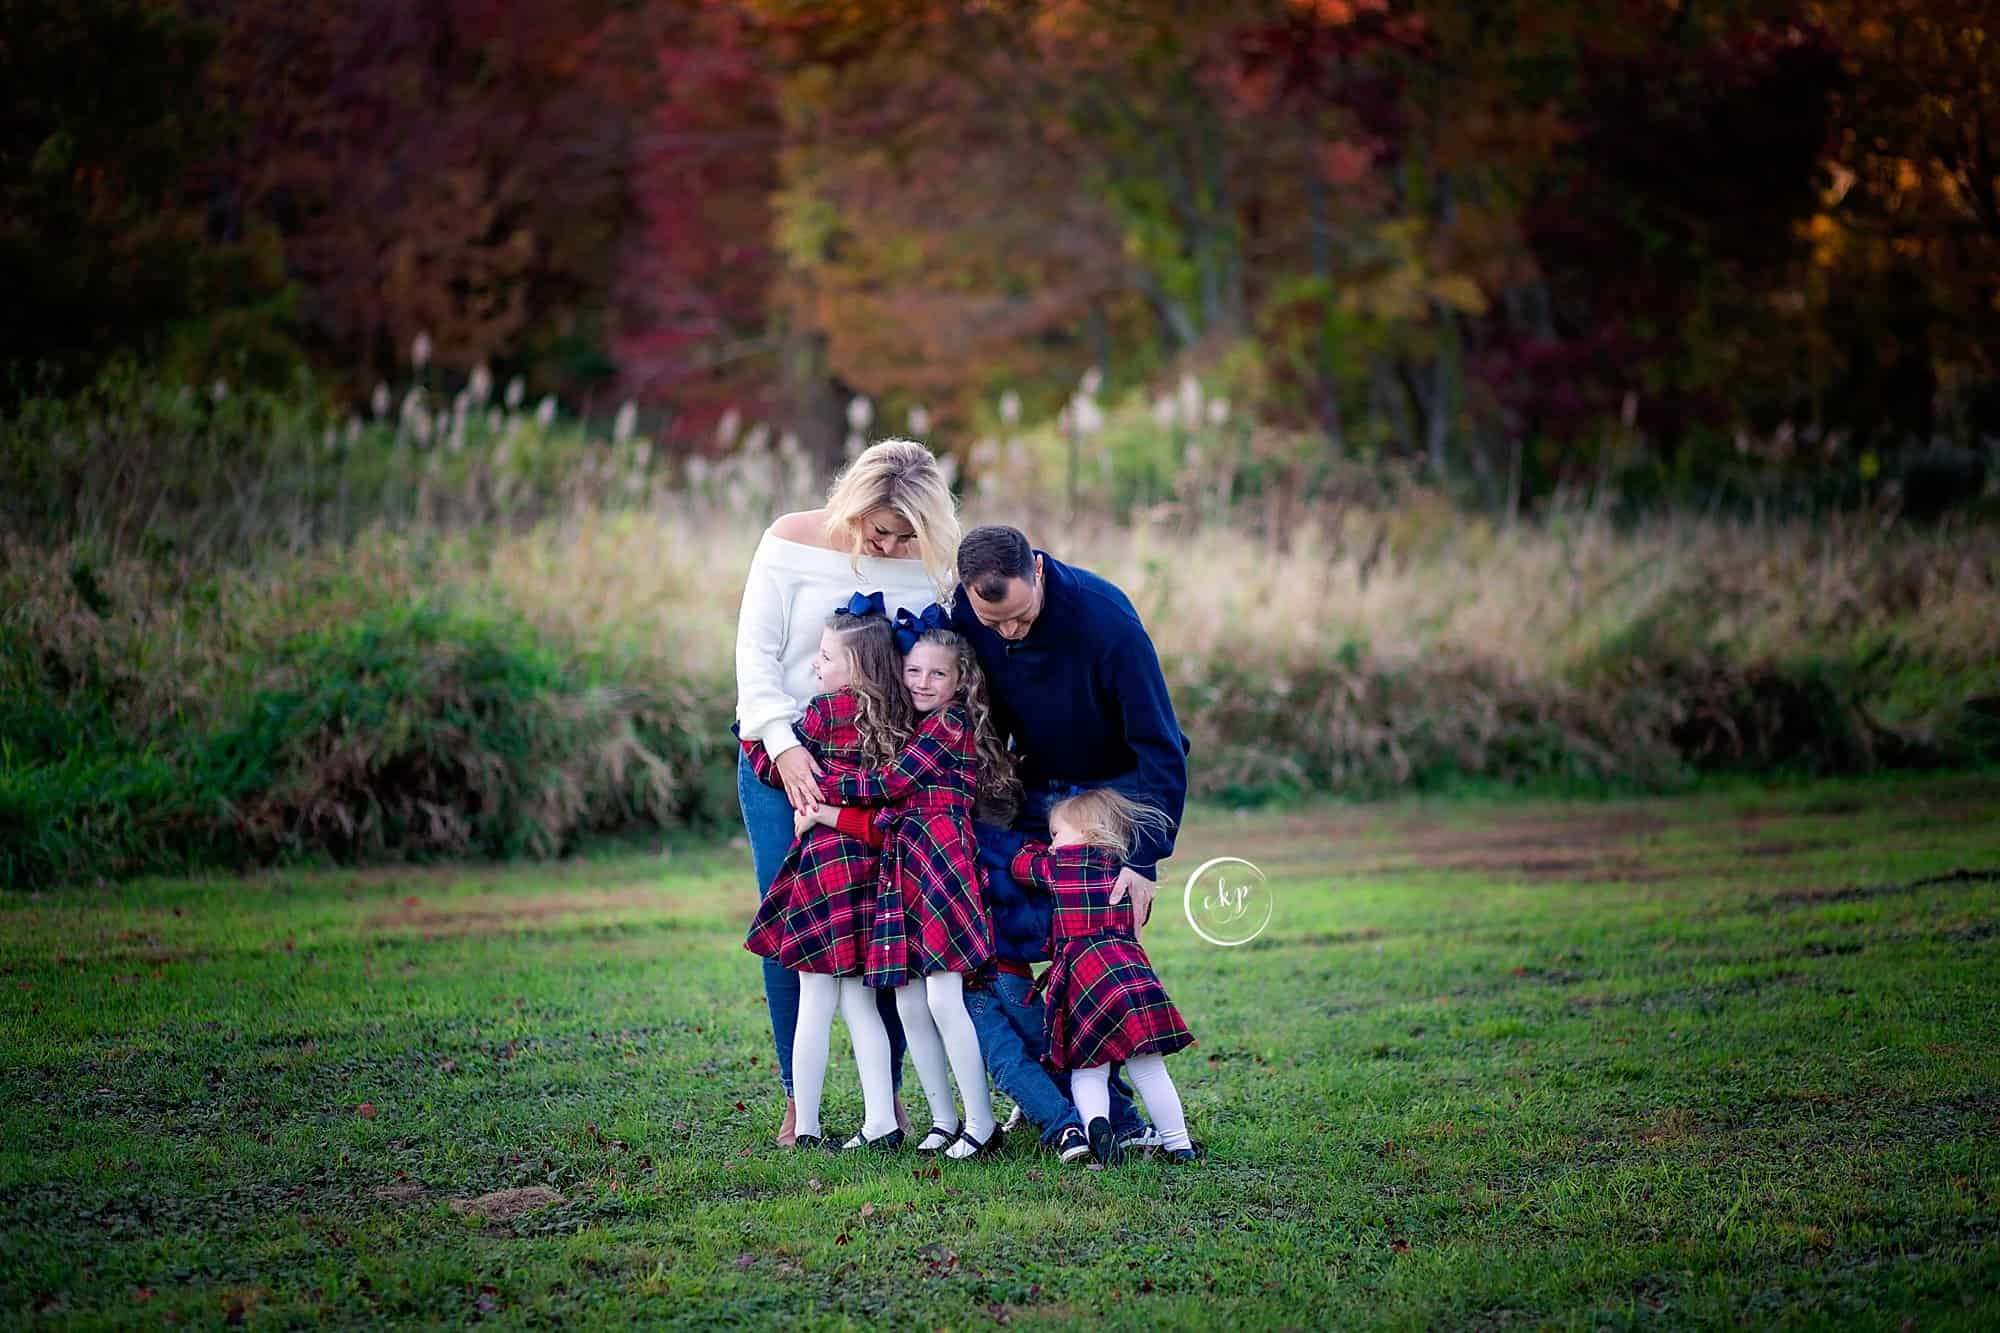 Fall family photography portraits in new england large family madison ct park foliage